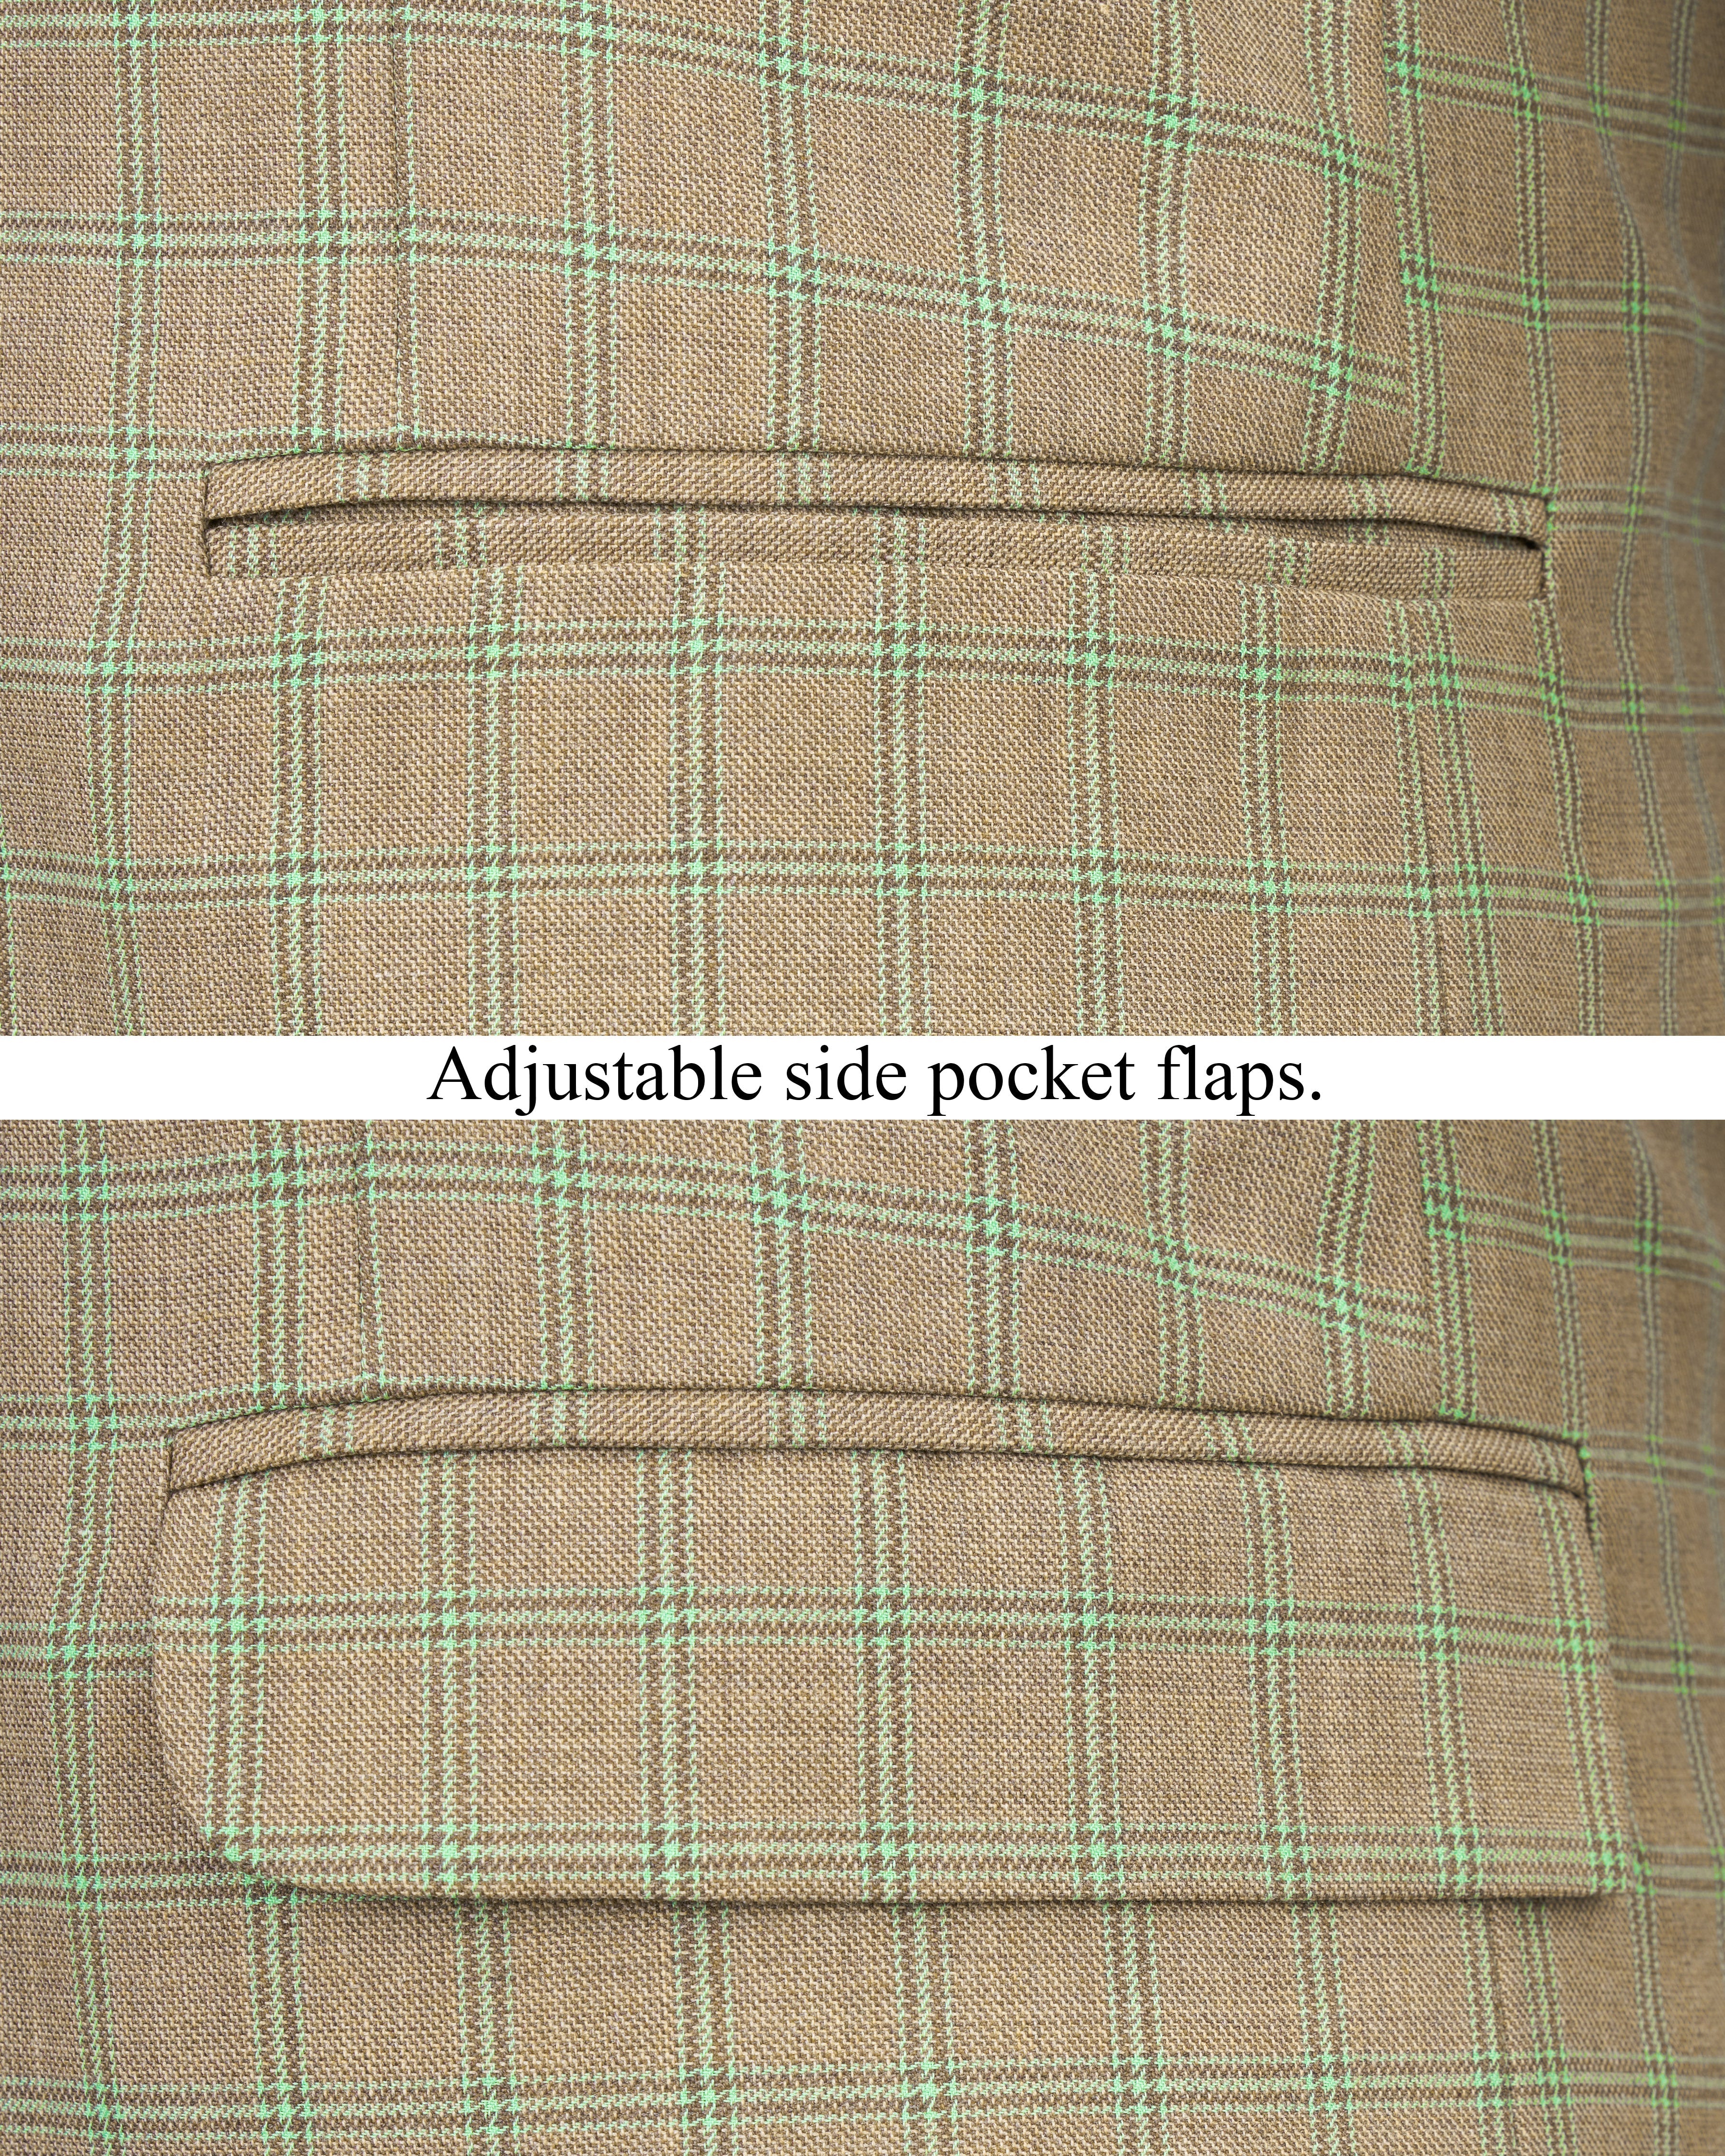 Sandrift Brown with Sprout Green Plaid Bandhgala Blazer BL2483-BG-36, BL2483-BG-38, BL2483-BG-40, BL2483-BG-42, BL2483-BG-44, BL2483-BG-46, BL2483-BG-48, BL2483-BG-50, BL2483-BG-52, BL2483-BG-54, BL2483-BG-56, BL2483-BG-58, BL2483-BG-60